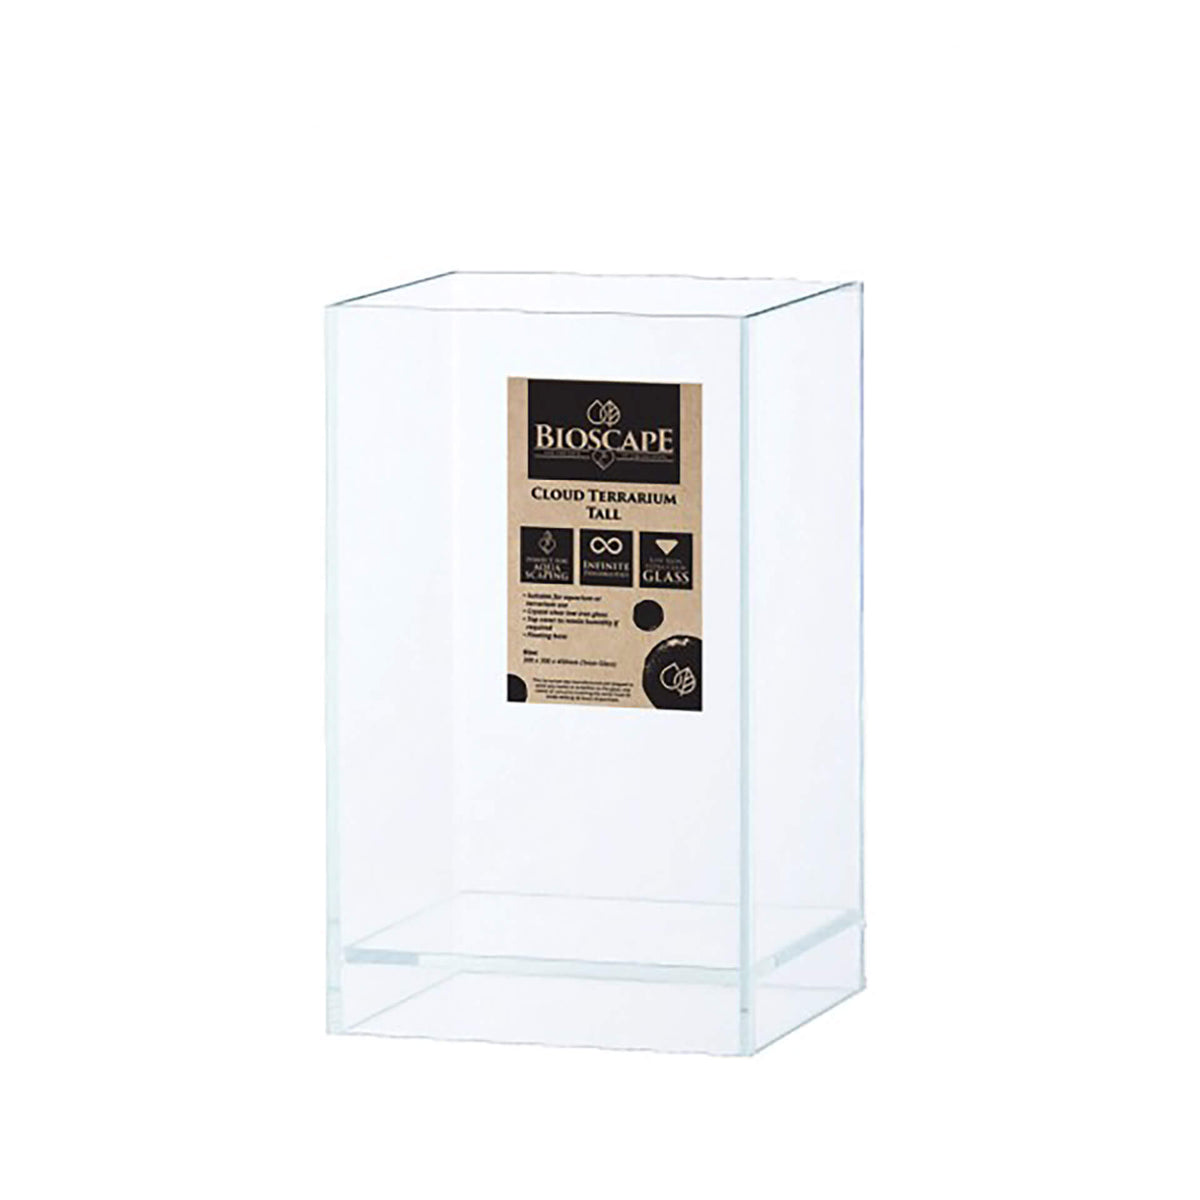 Bioscape Cloud Terrarium Tall Small- 20 x 20 x 35cm - In Store Pick Up Only**